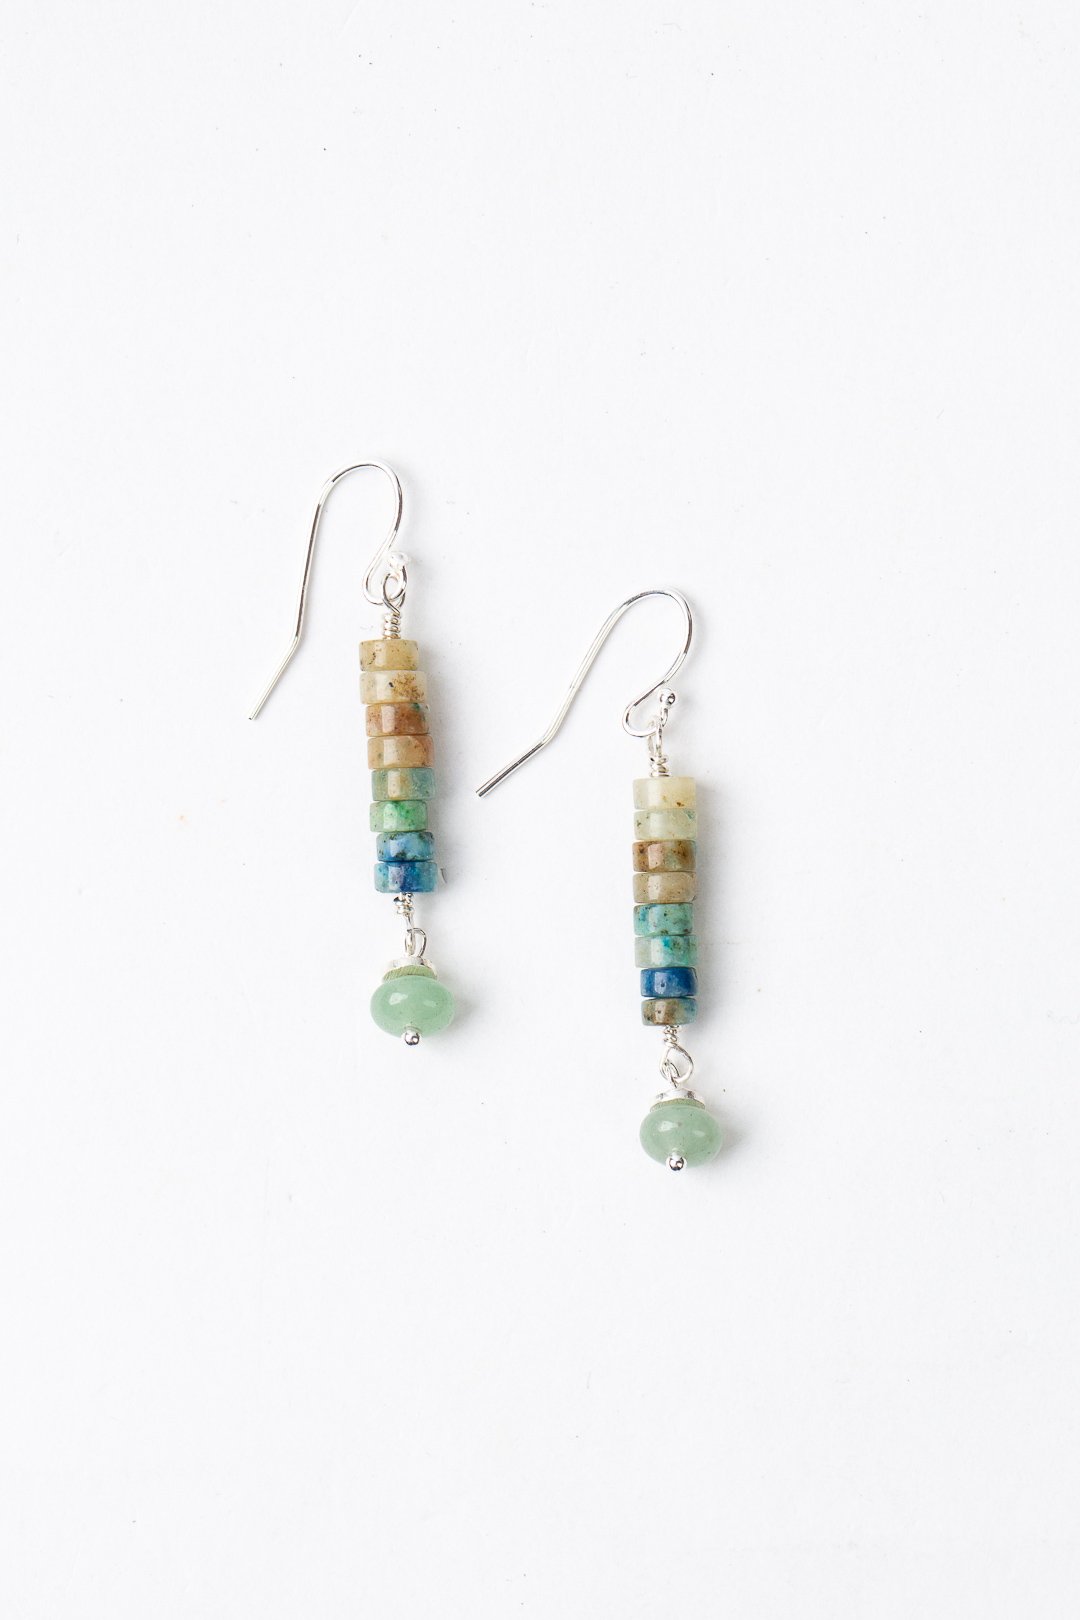 Limited Edition Jasper With Green Aventurine Simple Earrings